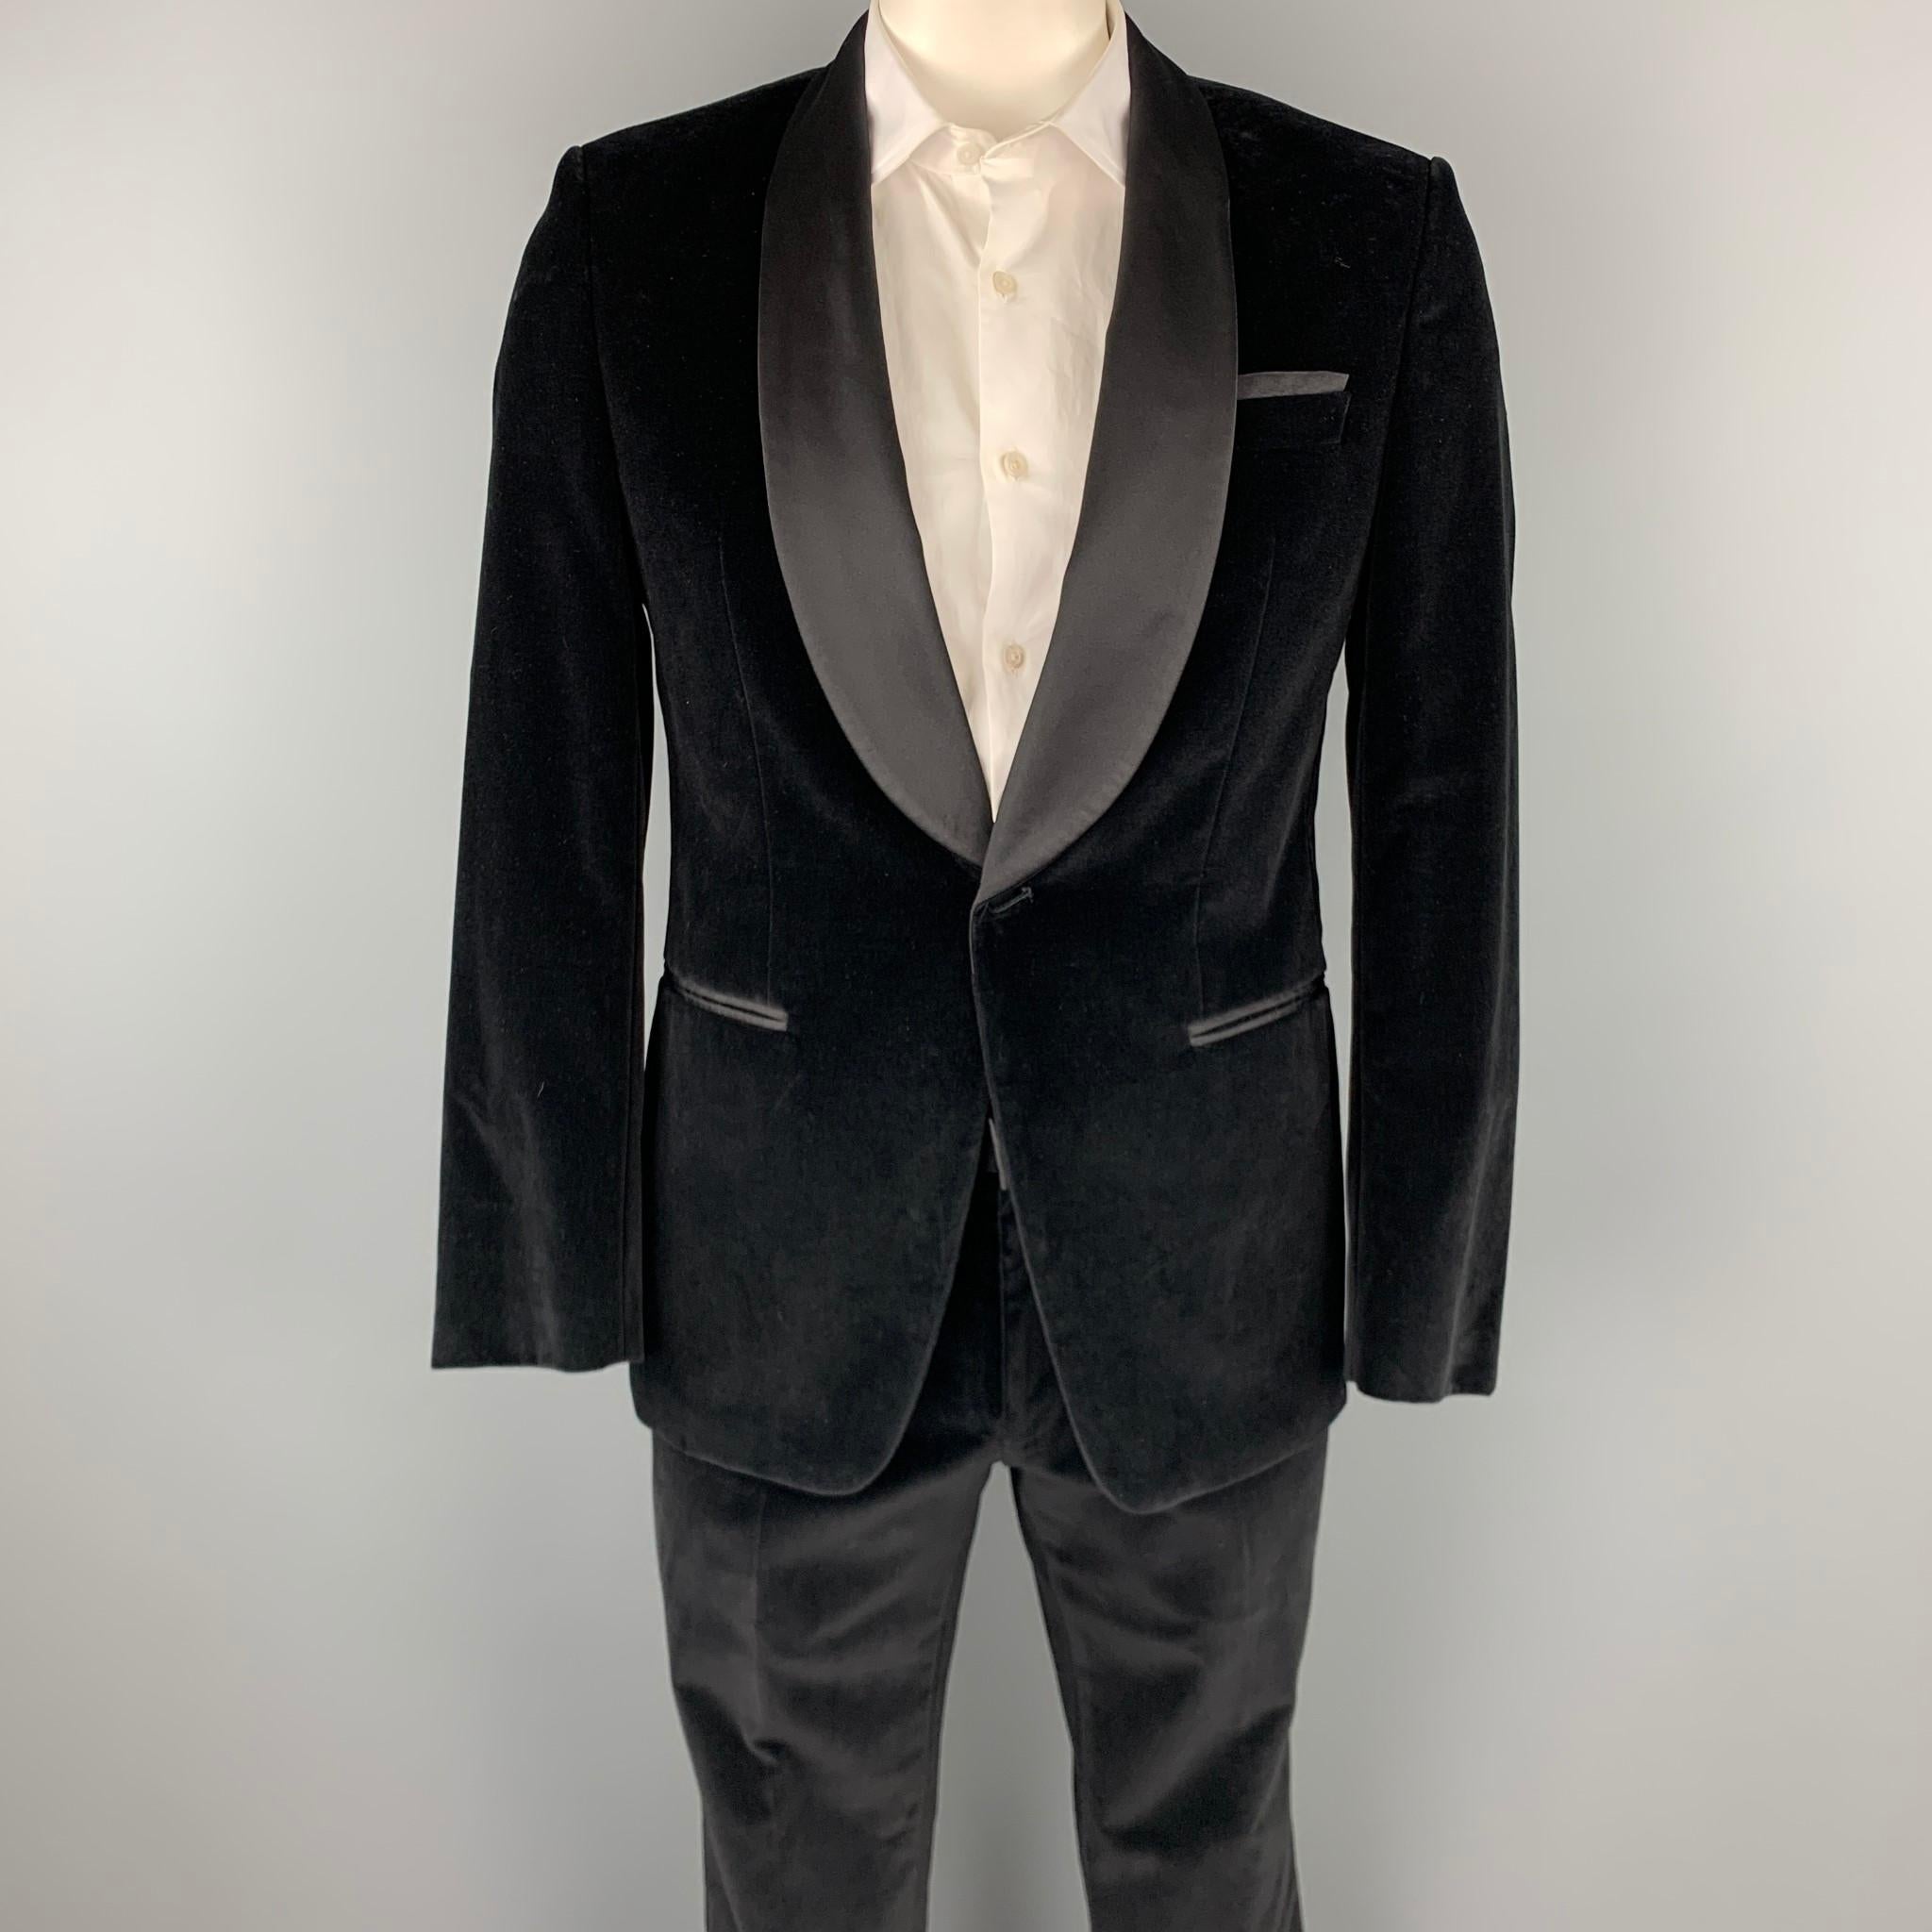 HUGO BOSS suit comes in a black cotton velvet with a full liner and includes a single breasted, single button sport coat with a shawl collar and matching flat front trousers. 

New With Tags.
Marked:

Measurements:

-Jacket
Shoulder: 18.5 in.
Chest: